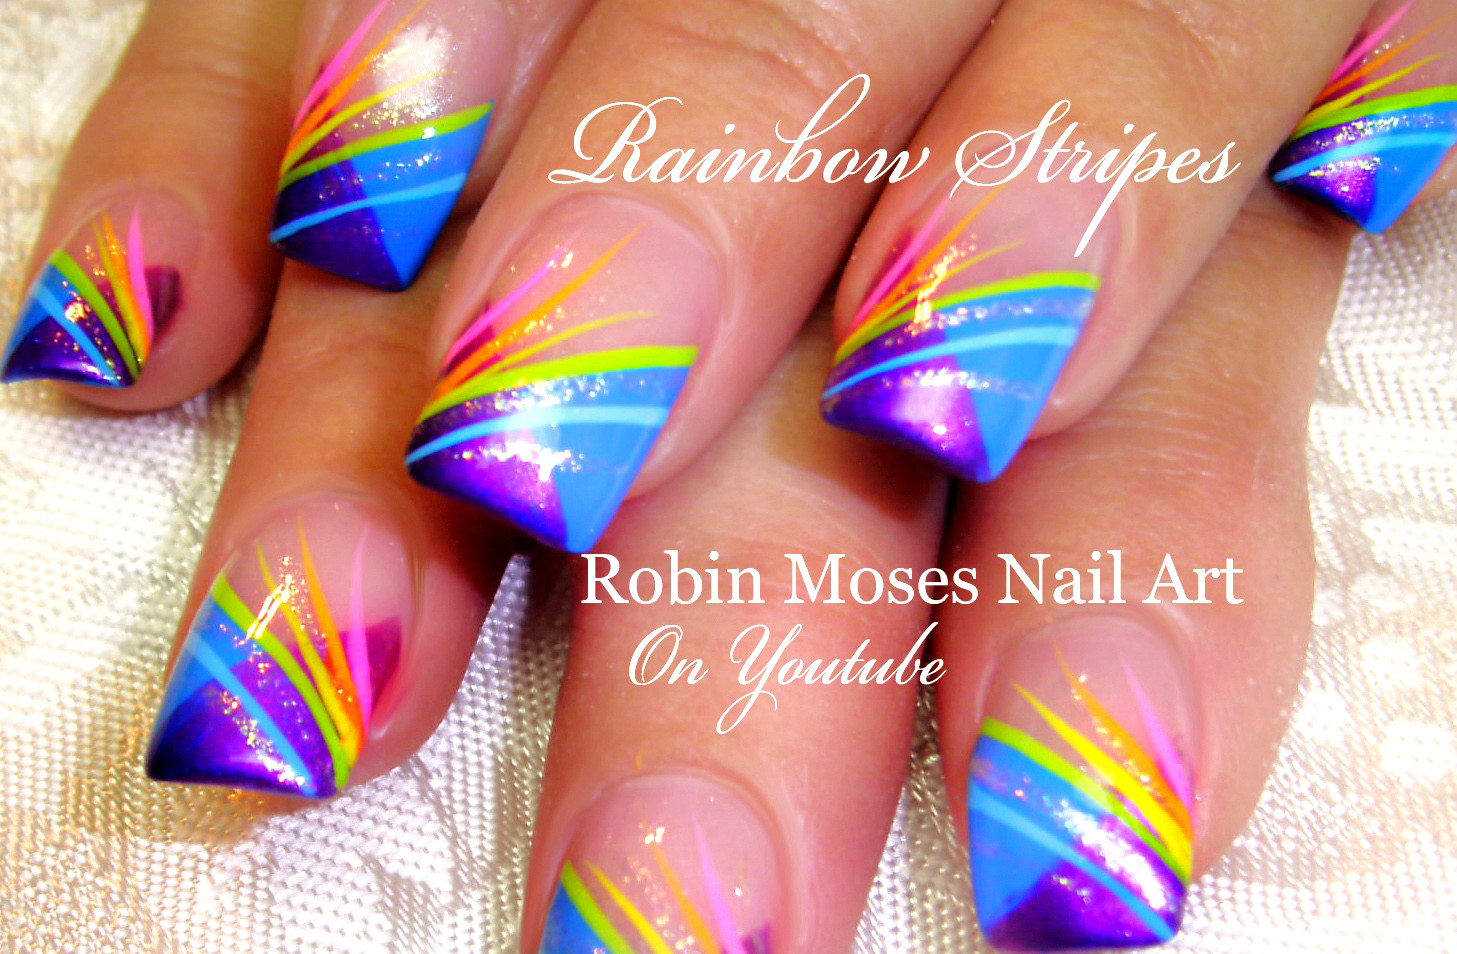 Robin Moses Nail Art Brushes - Yahoo Search Results - wide 7